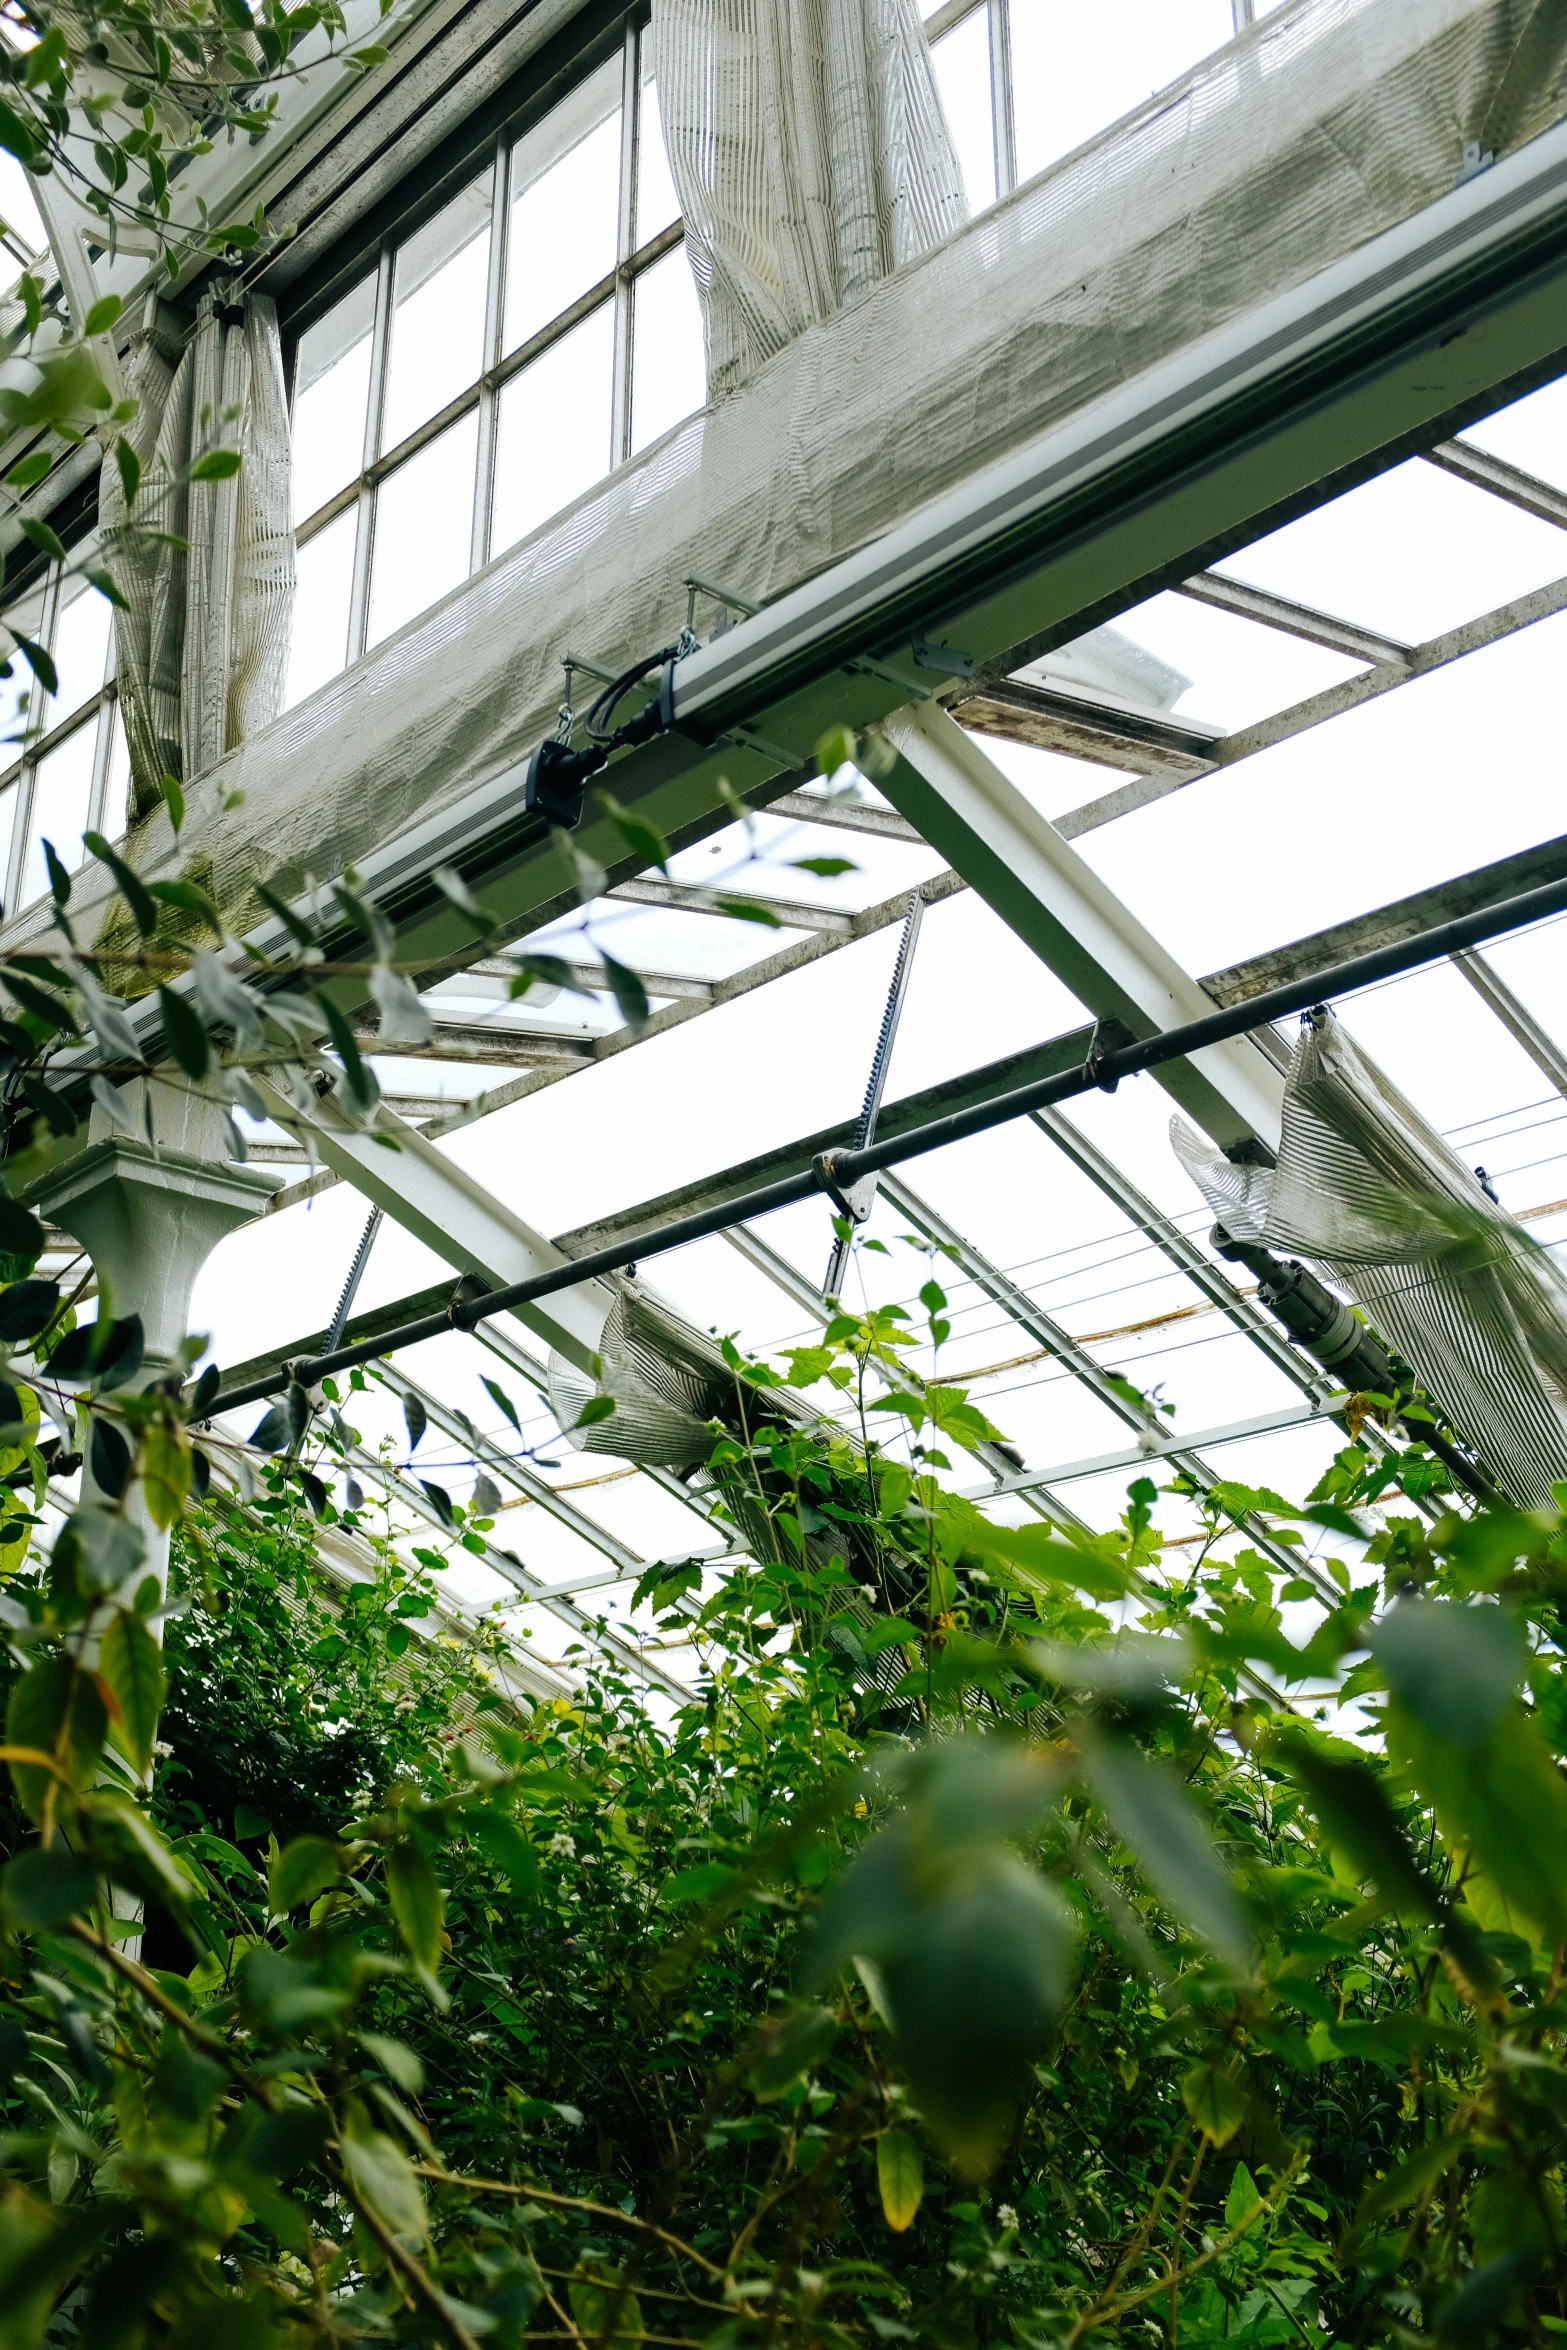 a view of inside a greenhouse from a high floor